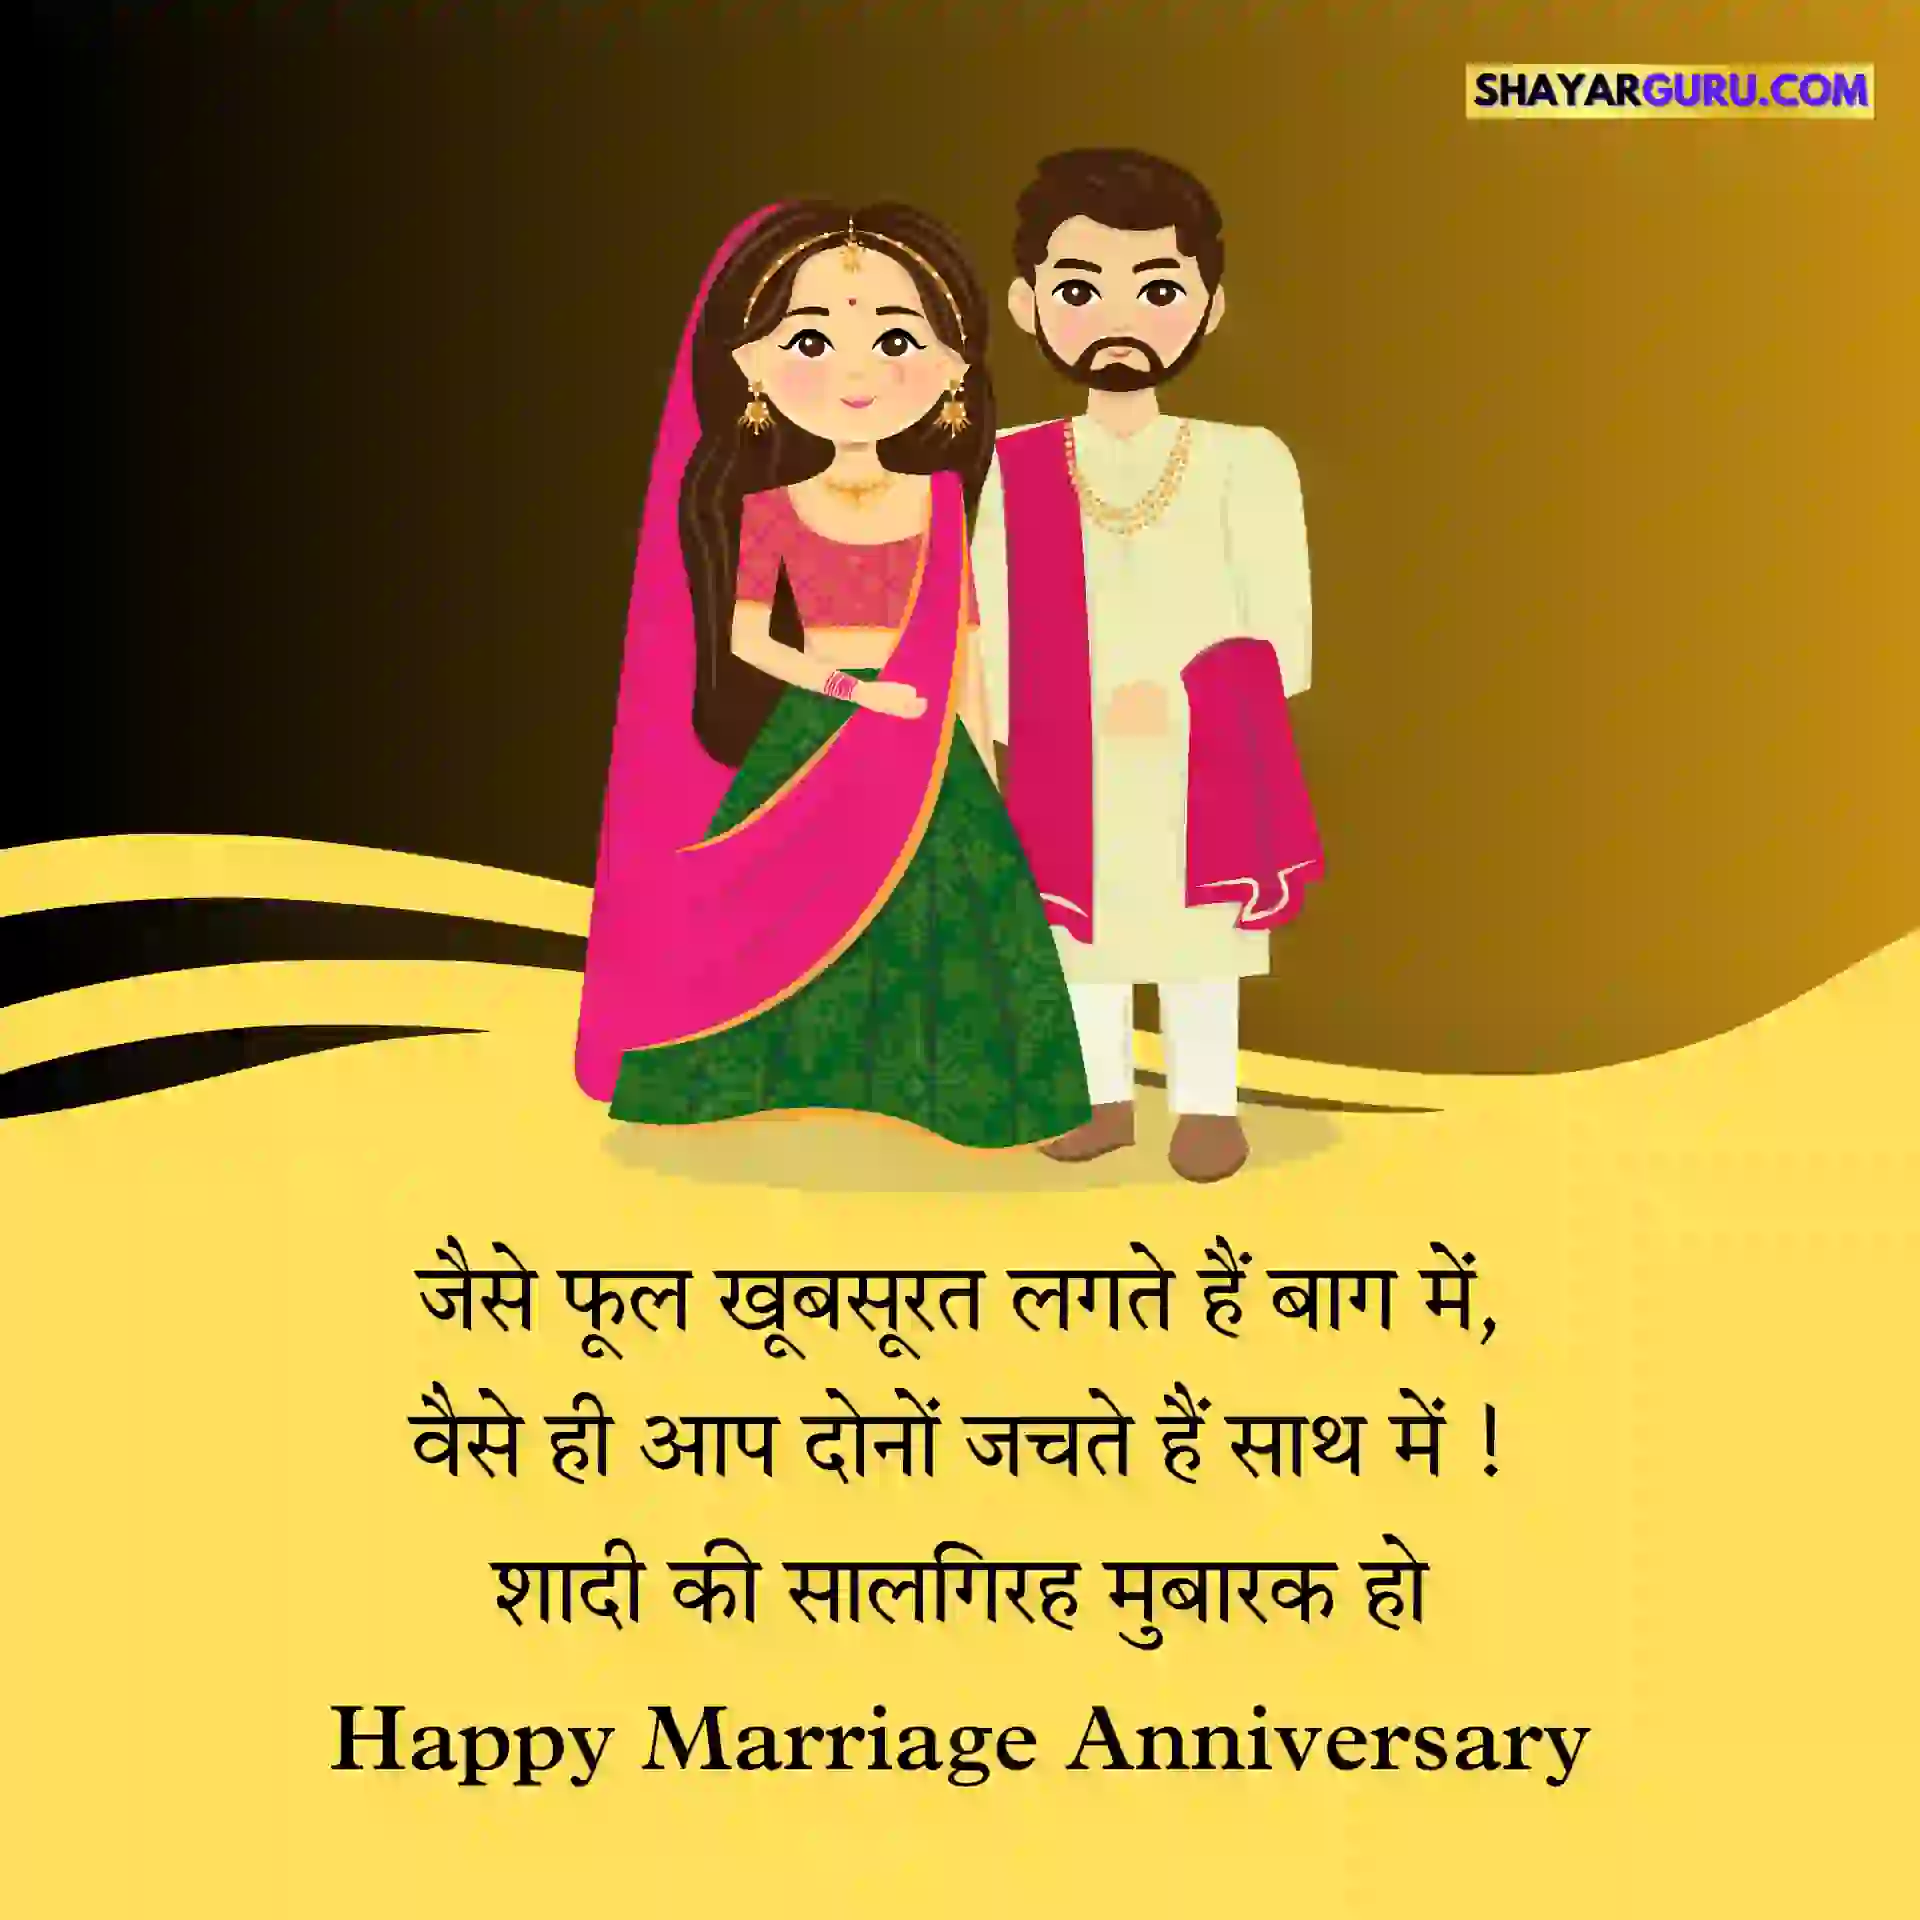 Happy Marriage Anniversary images